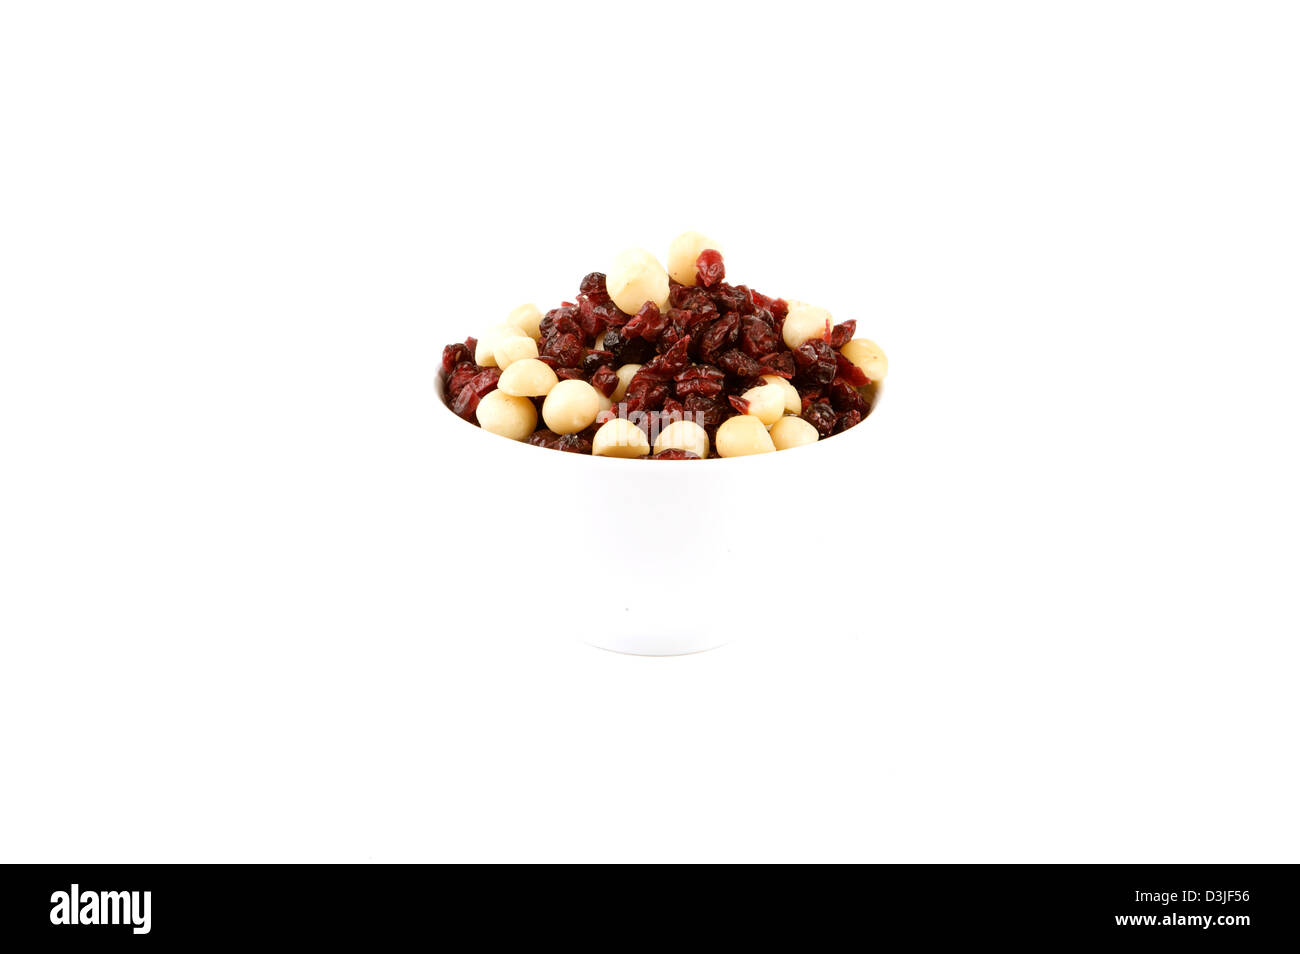 A bowl of mixed nuts shot on a white high key background Stock Photo